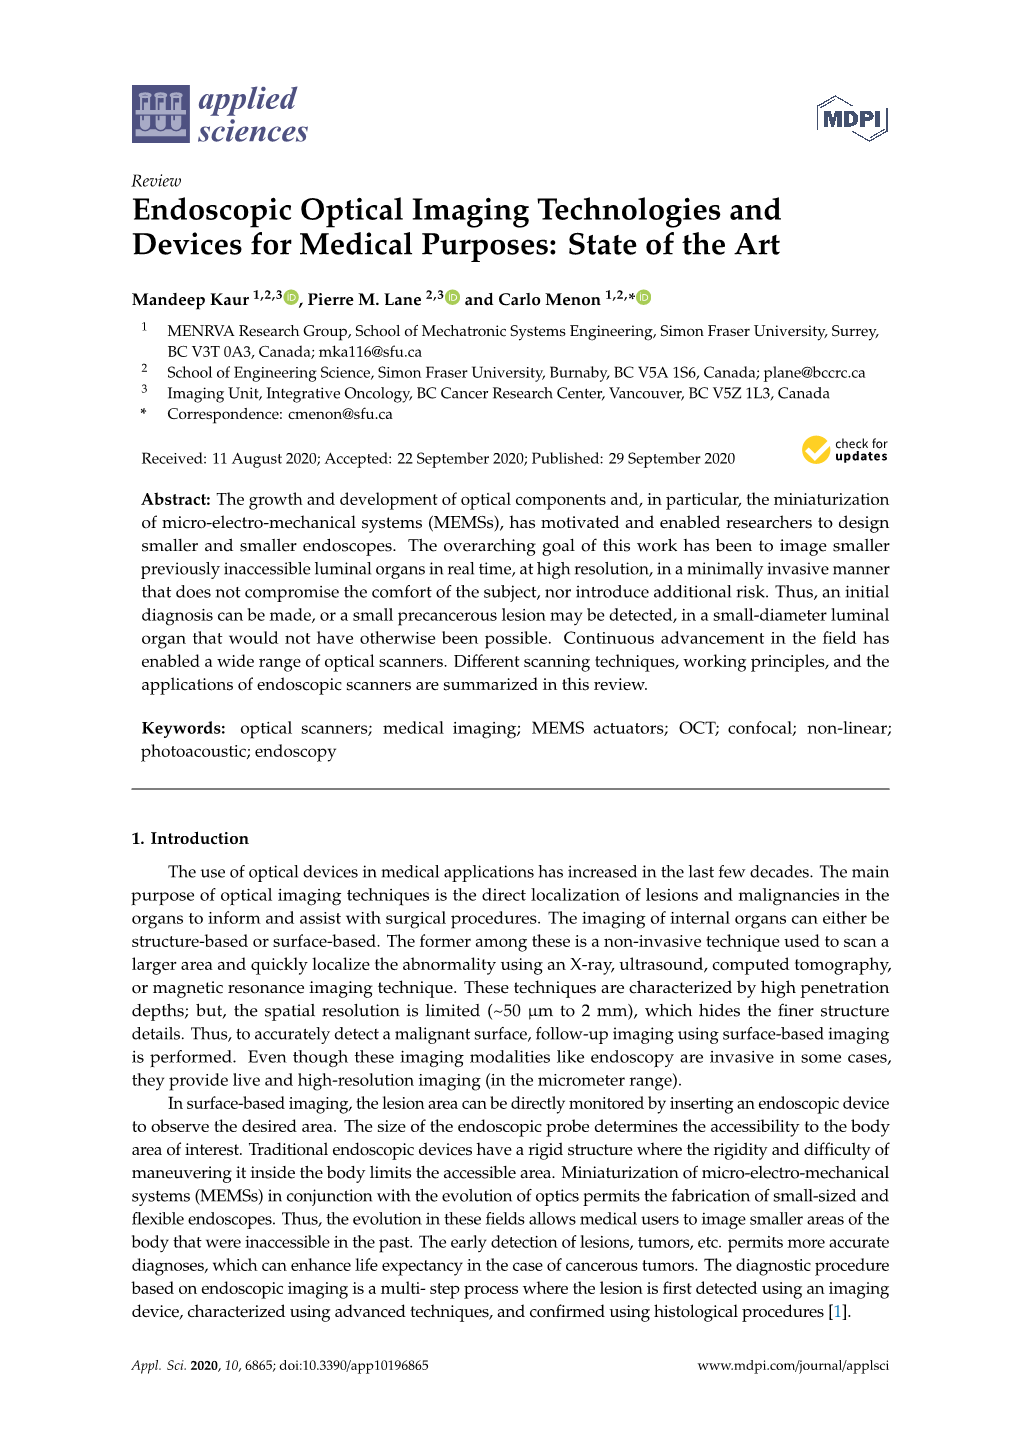 Endoscopic Optical Imaging Technologies and Devices for Medical Purposes: State of the Art